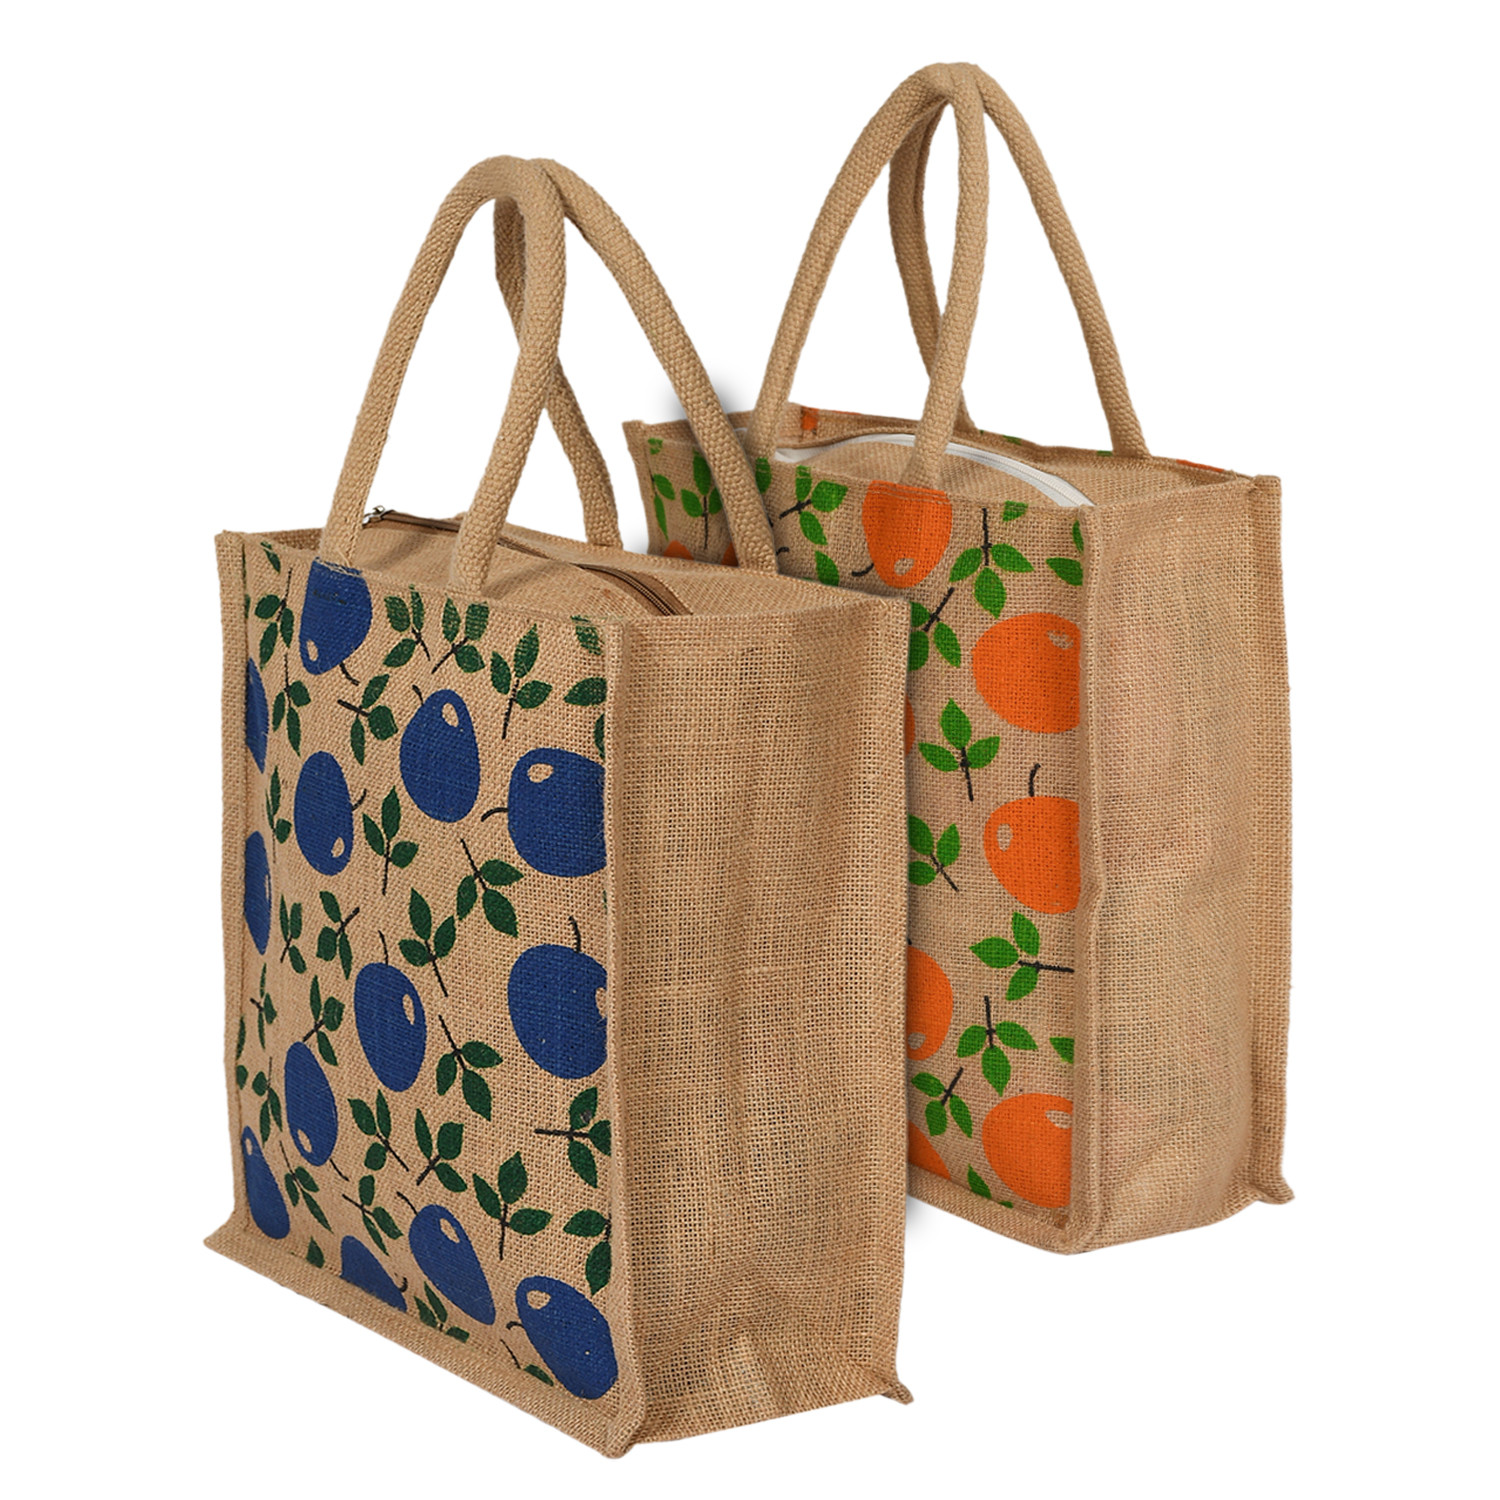 Kuber Industries Jute Reusable Eco-Friendly Hand Bag/Grocery Bag For Man, Woman With Handle Pack Of 2 (Orange & Blue) 54KM4364